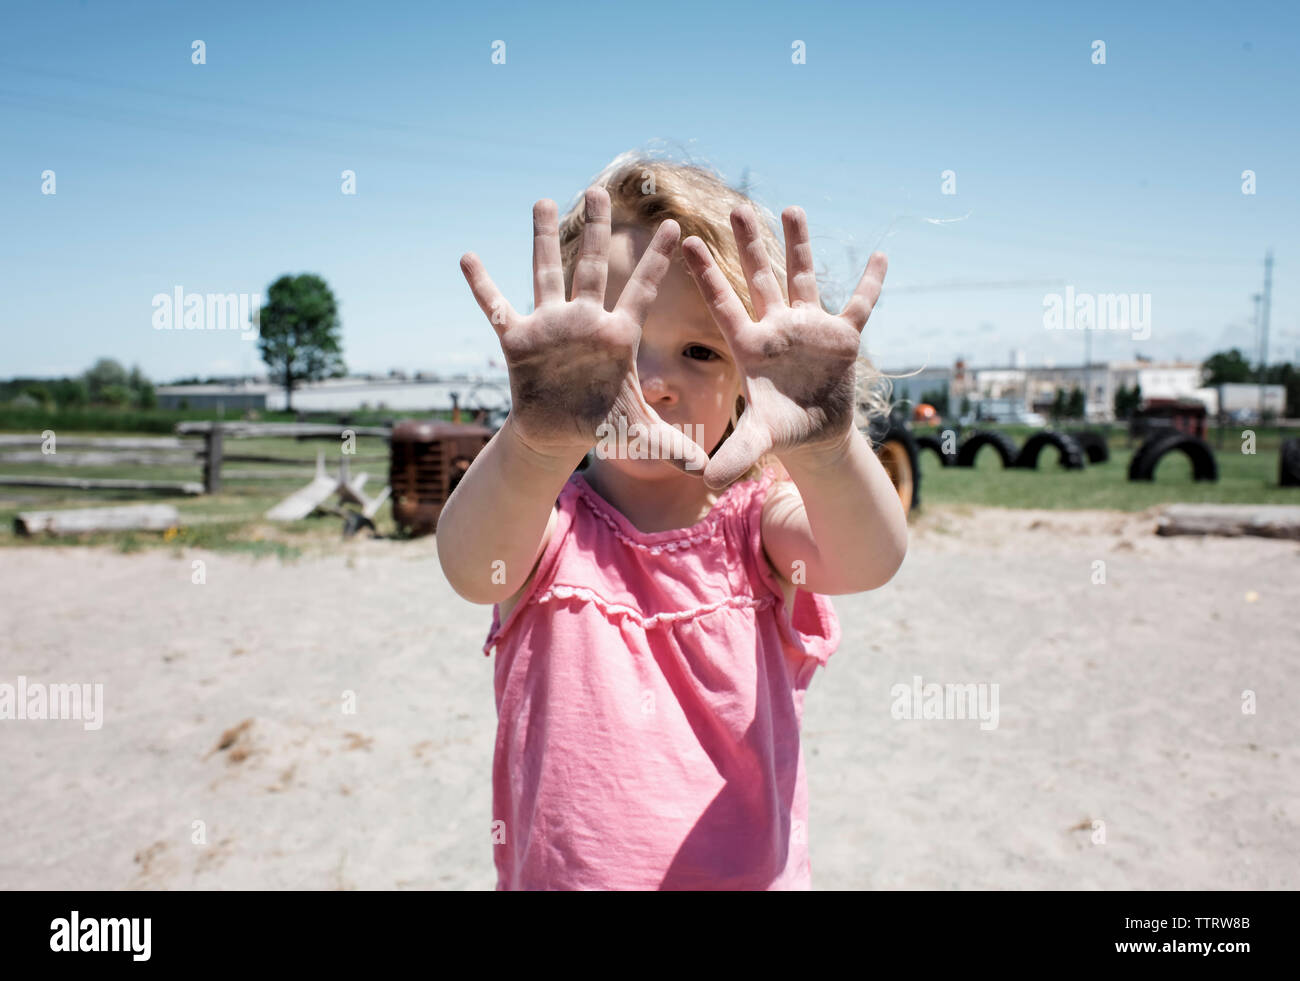 Portrait of girl showing dirty hands while standing on sand against clear sky at playground Stock Photo